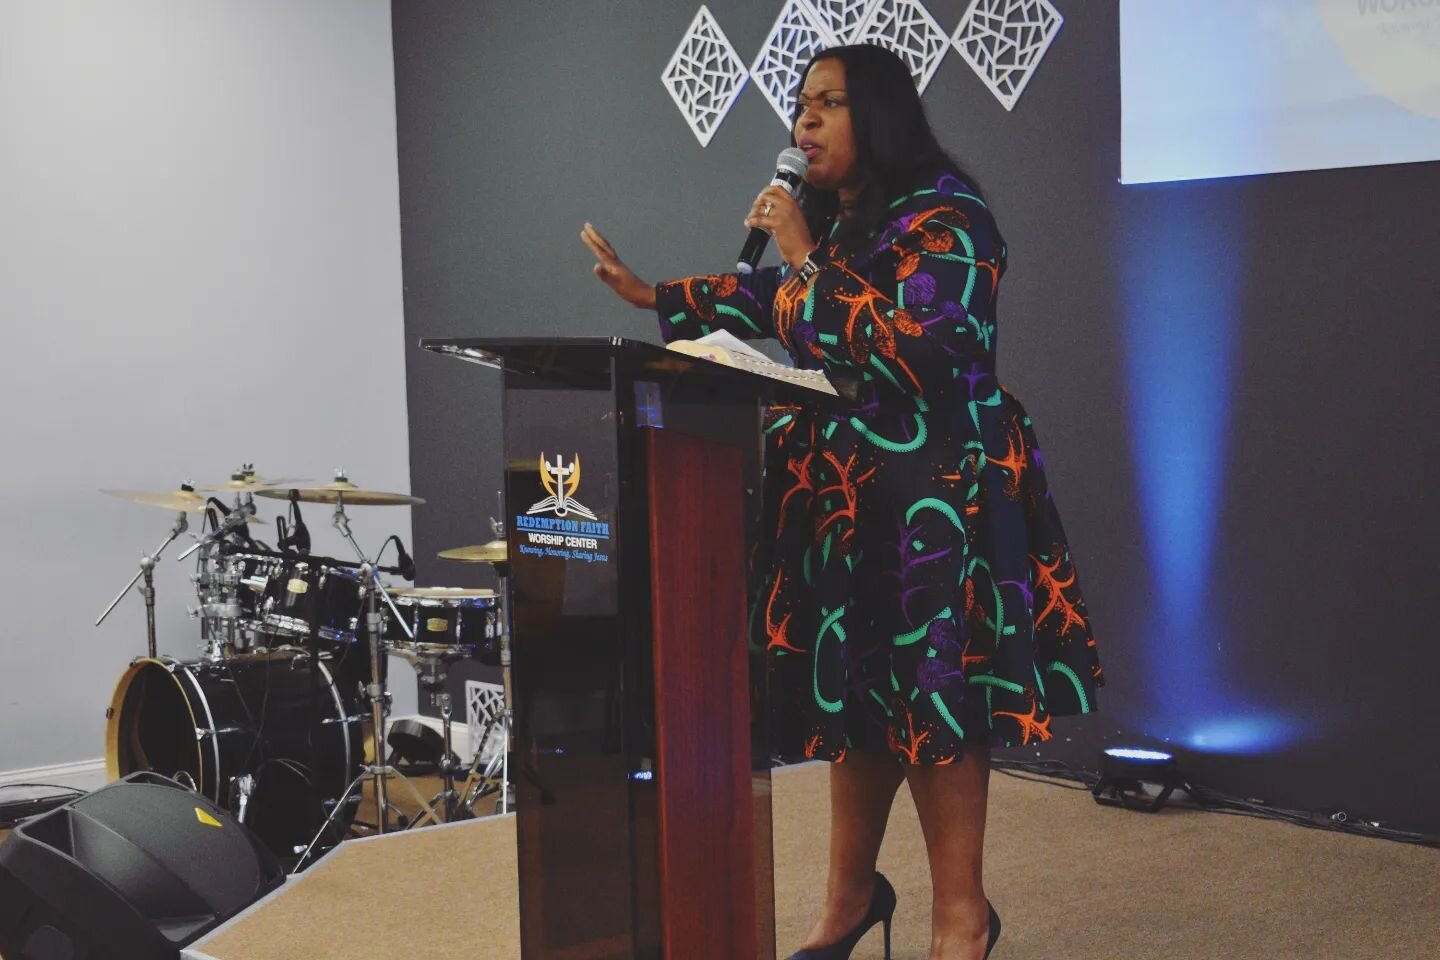 Great &amp; Powerful Conference Today. Our Guest speaker preached mightily- Take heed &amp; live the word- let go of the weight. 
____________________
#RFWCWomensConference #RFWC #WomensConference #Saturday #Service